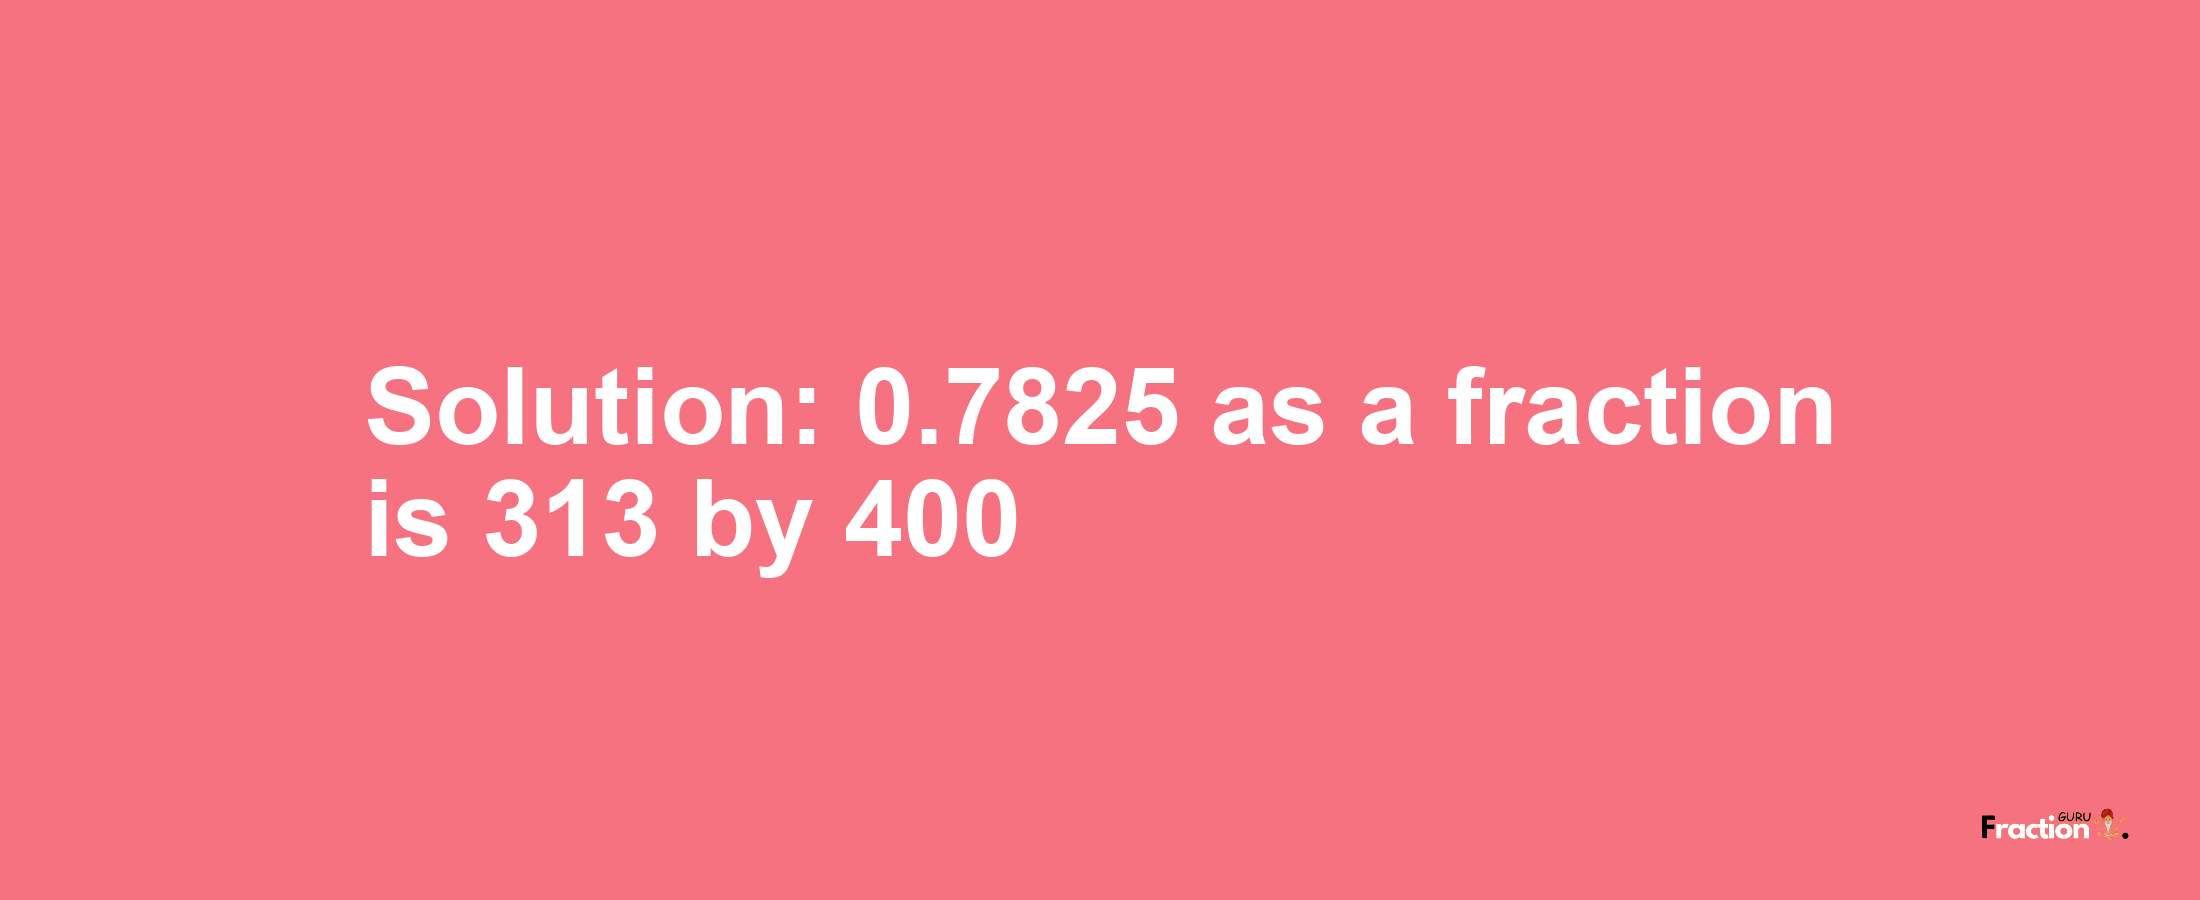 Solution:0.7825 as a fraction is 313/400